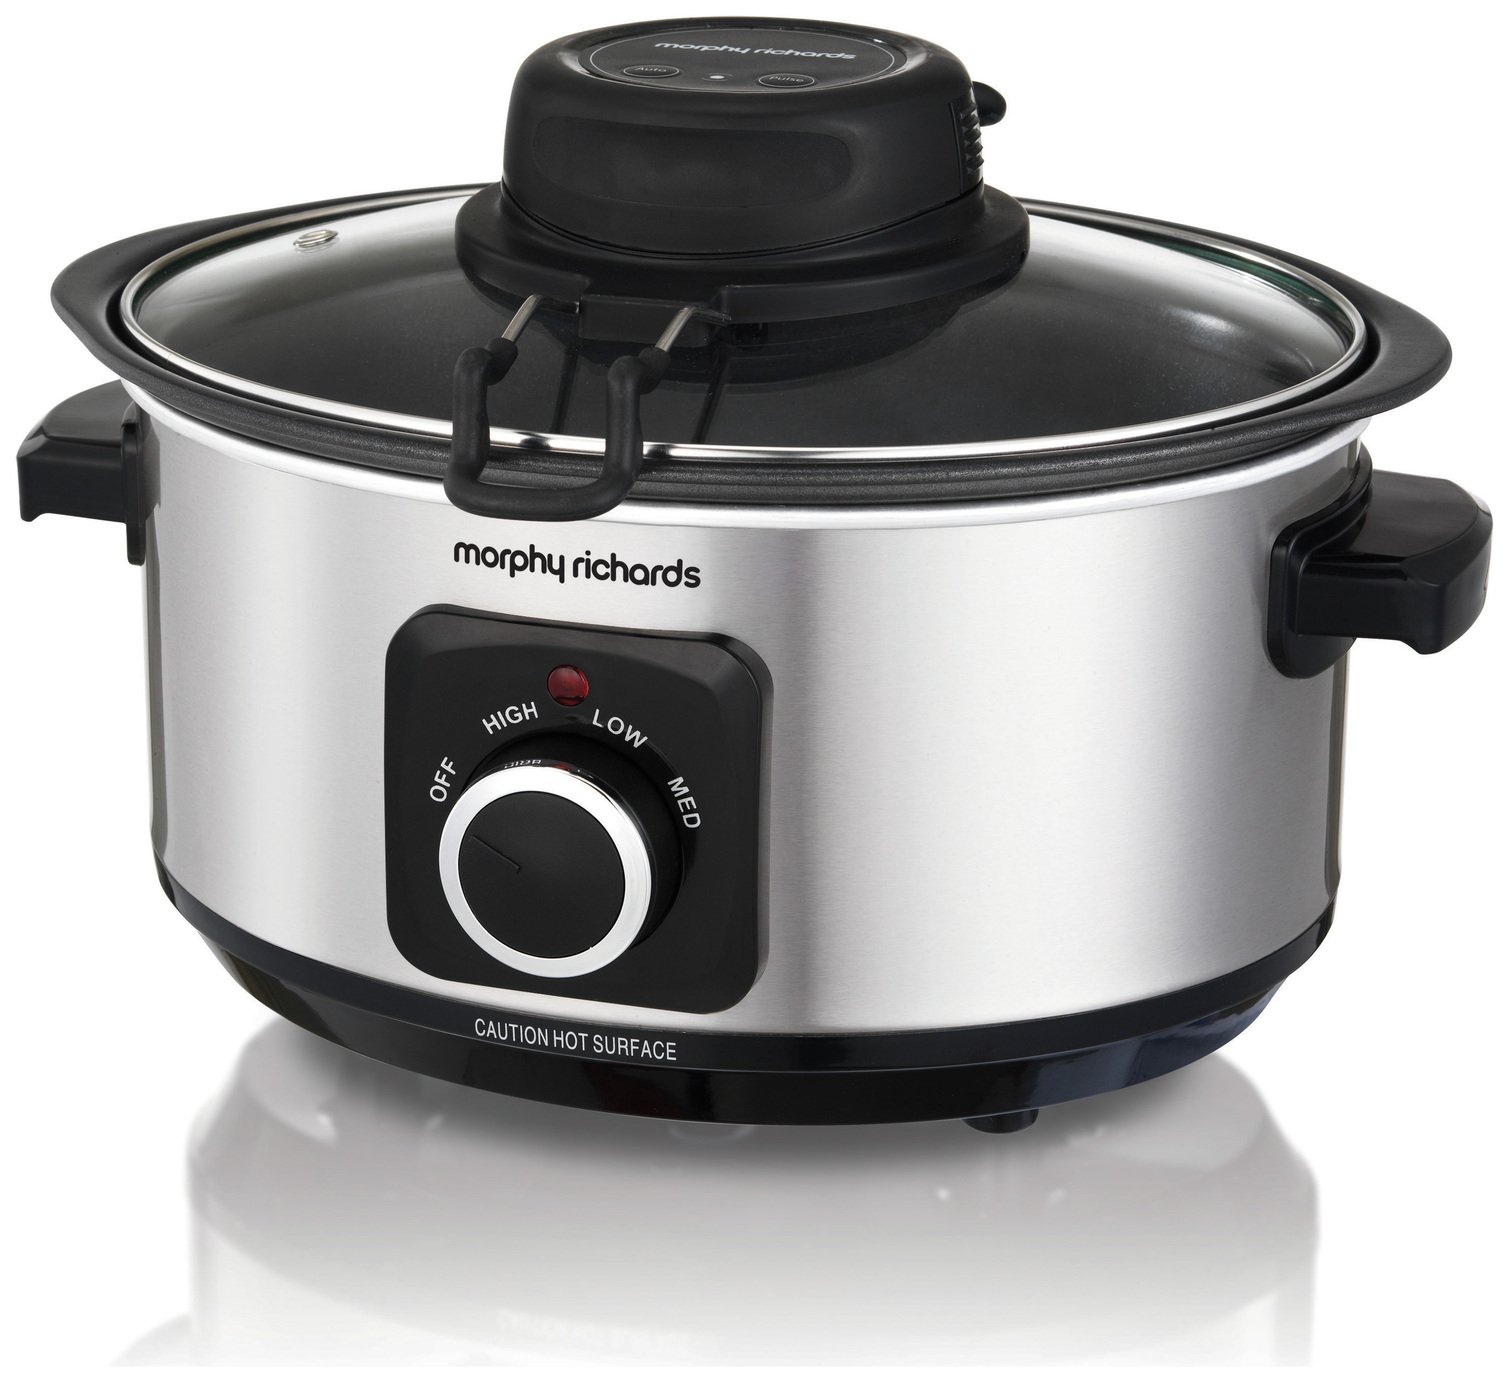 Morphy Richards 3.5L Auto-Stir Slow Cooker - Stainless Steel